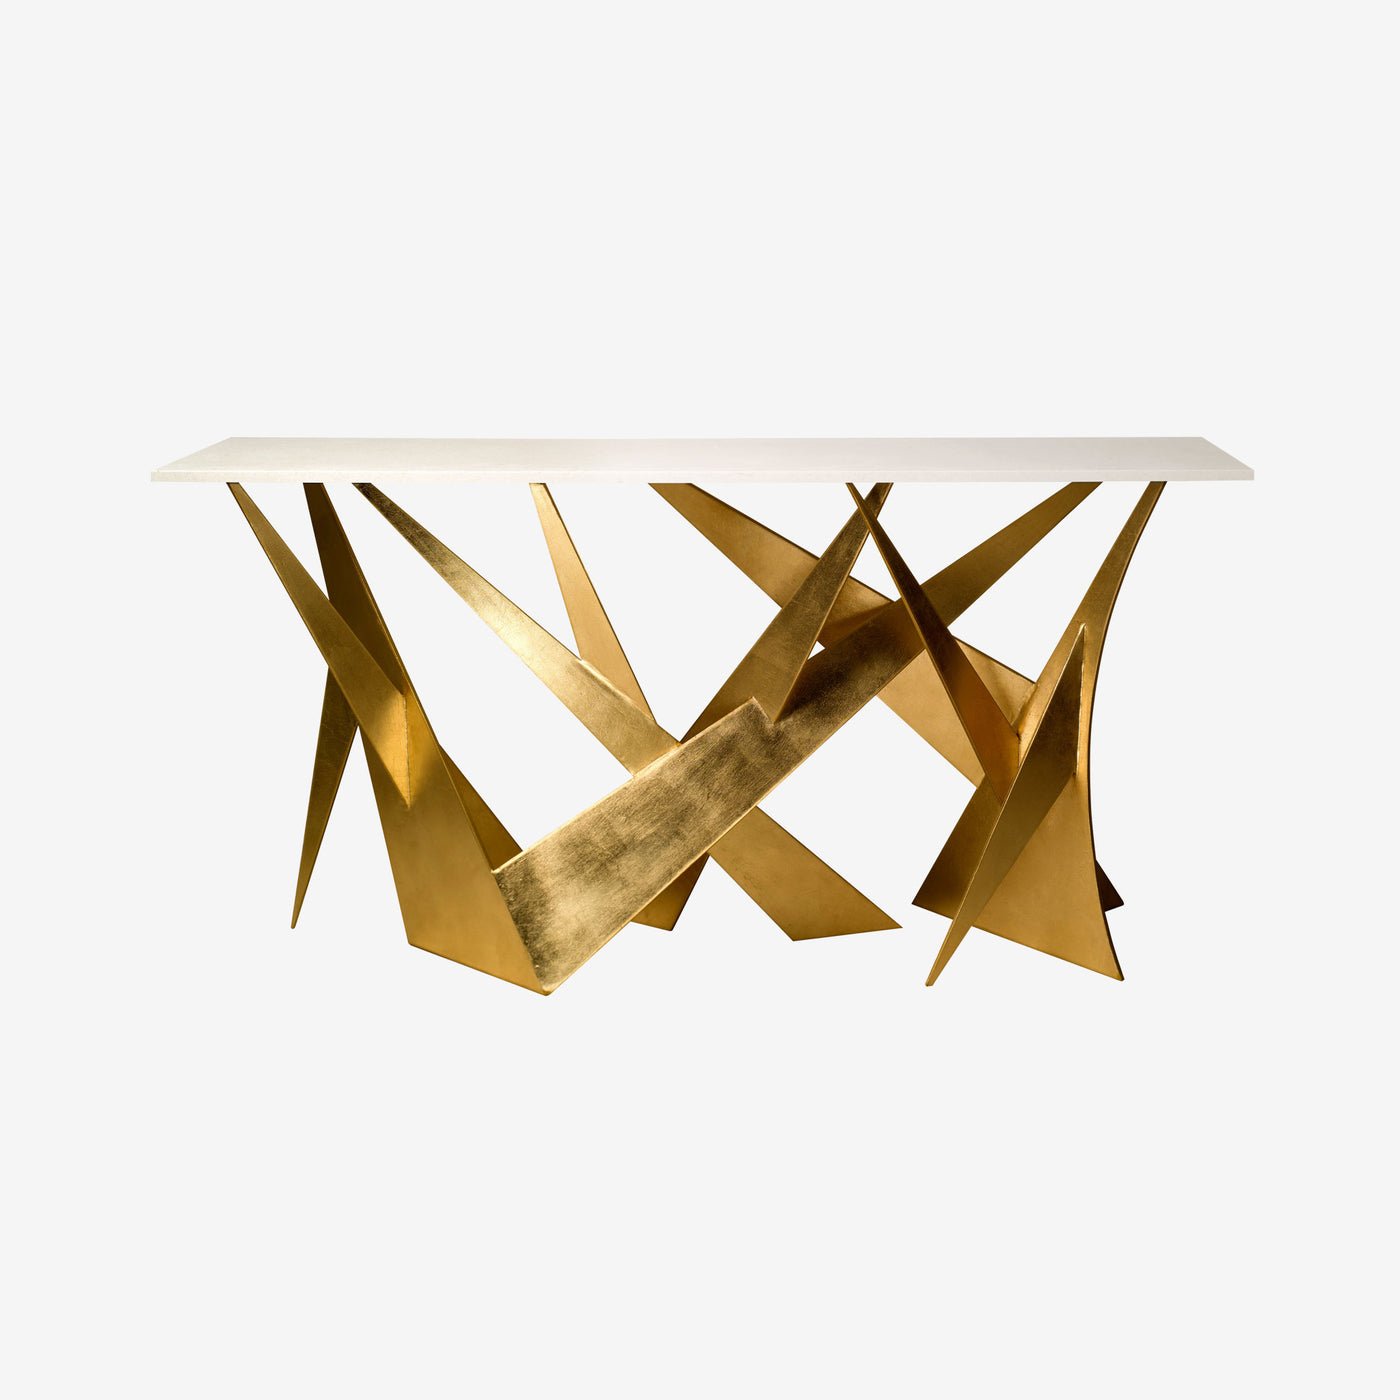 Chelsea_Waterfront_Claremont_Console_Table_001_1400x.jpg